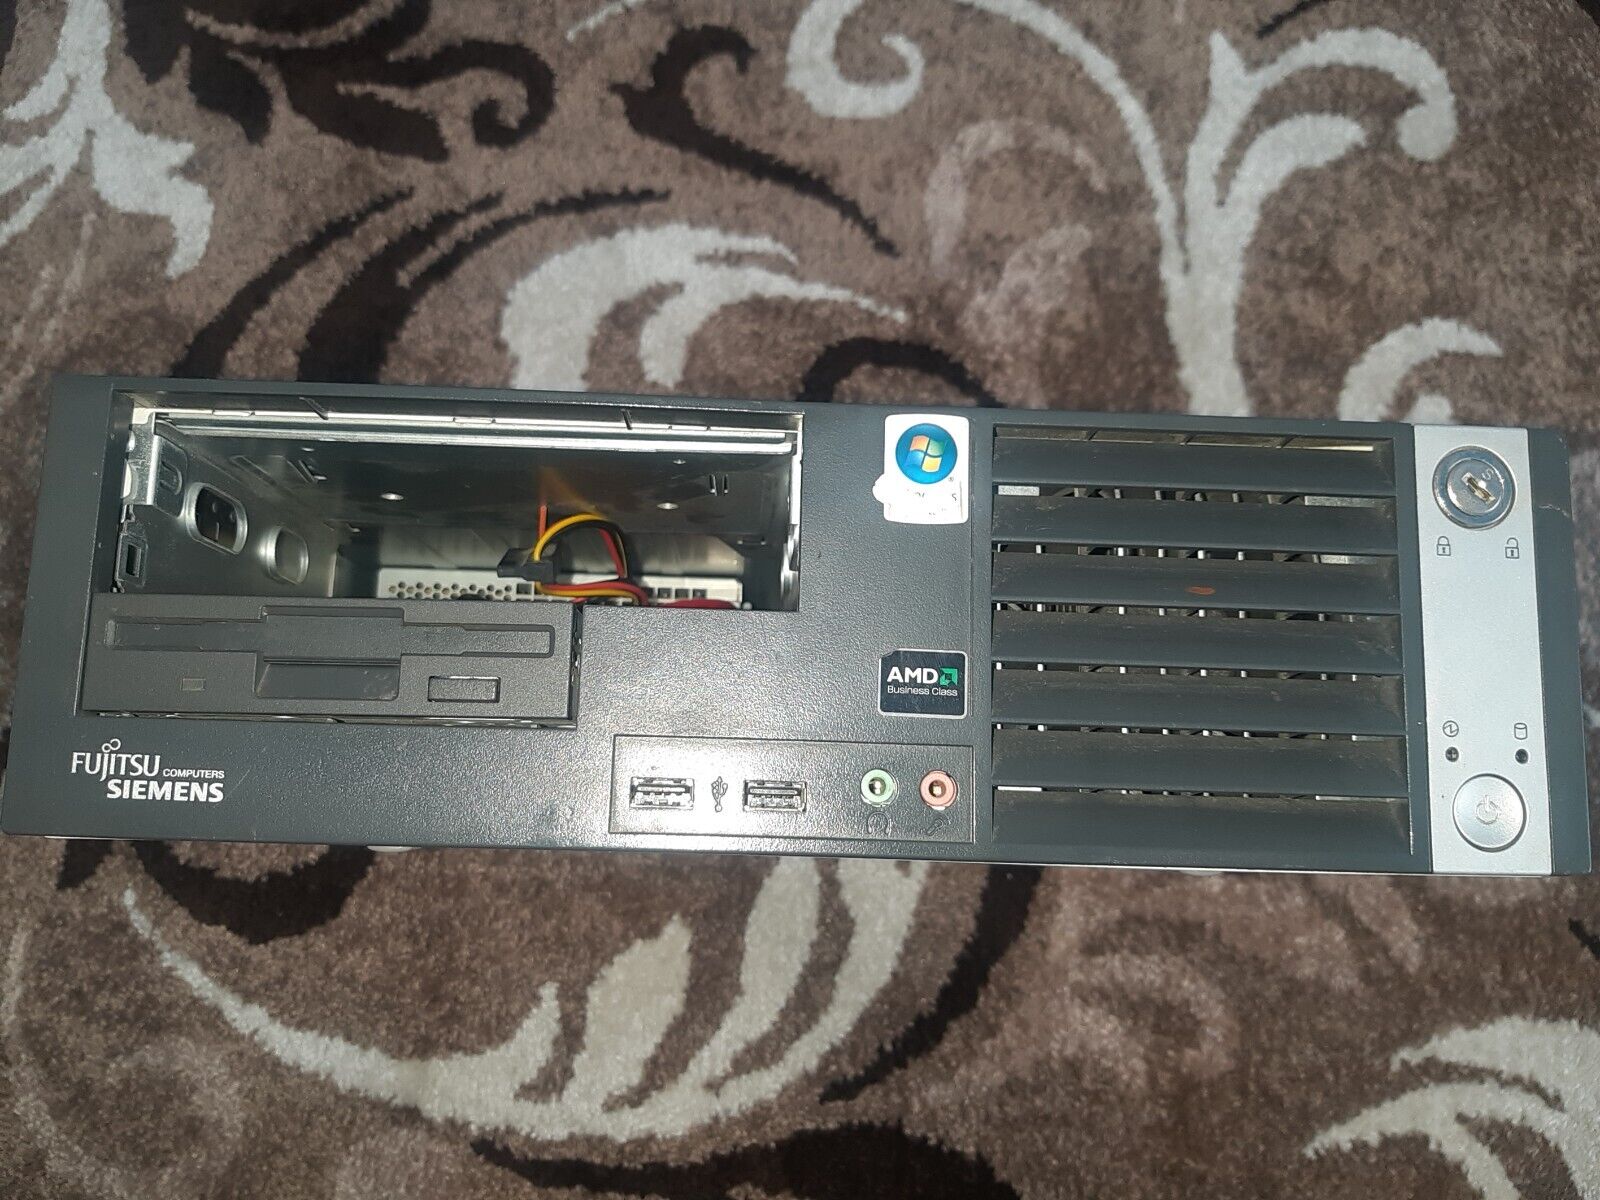 Old PC, SIEMENS Fujitsu computers, for spare parts.